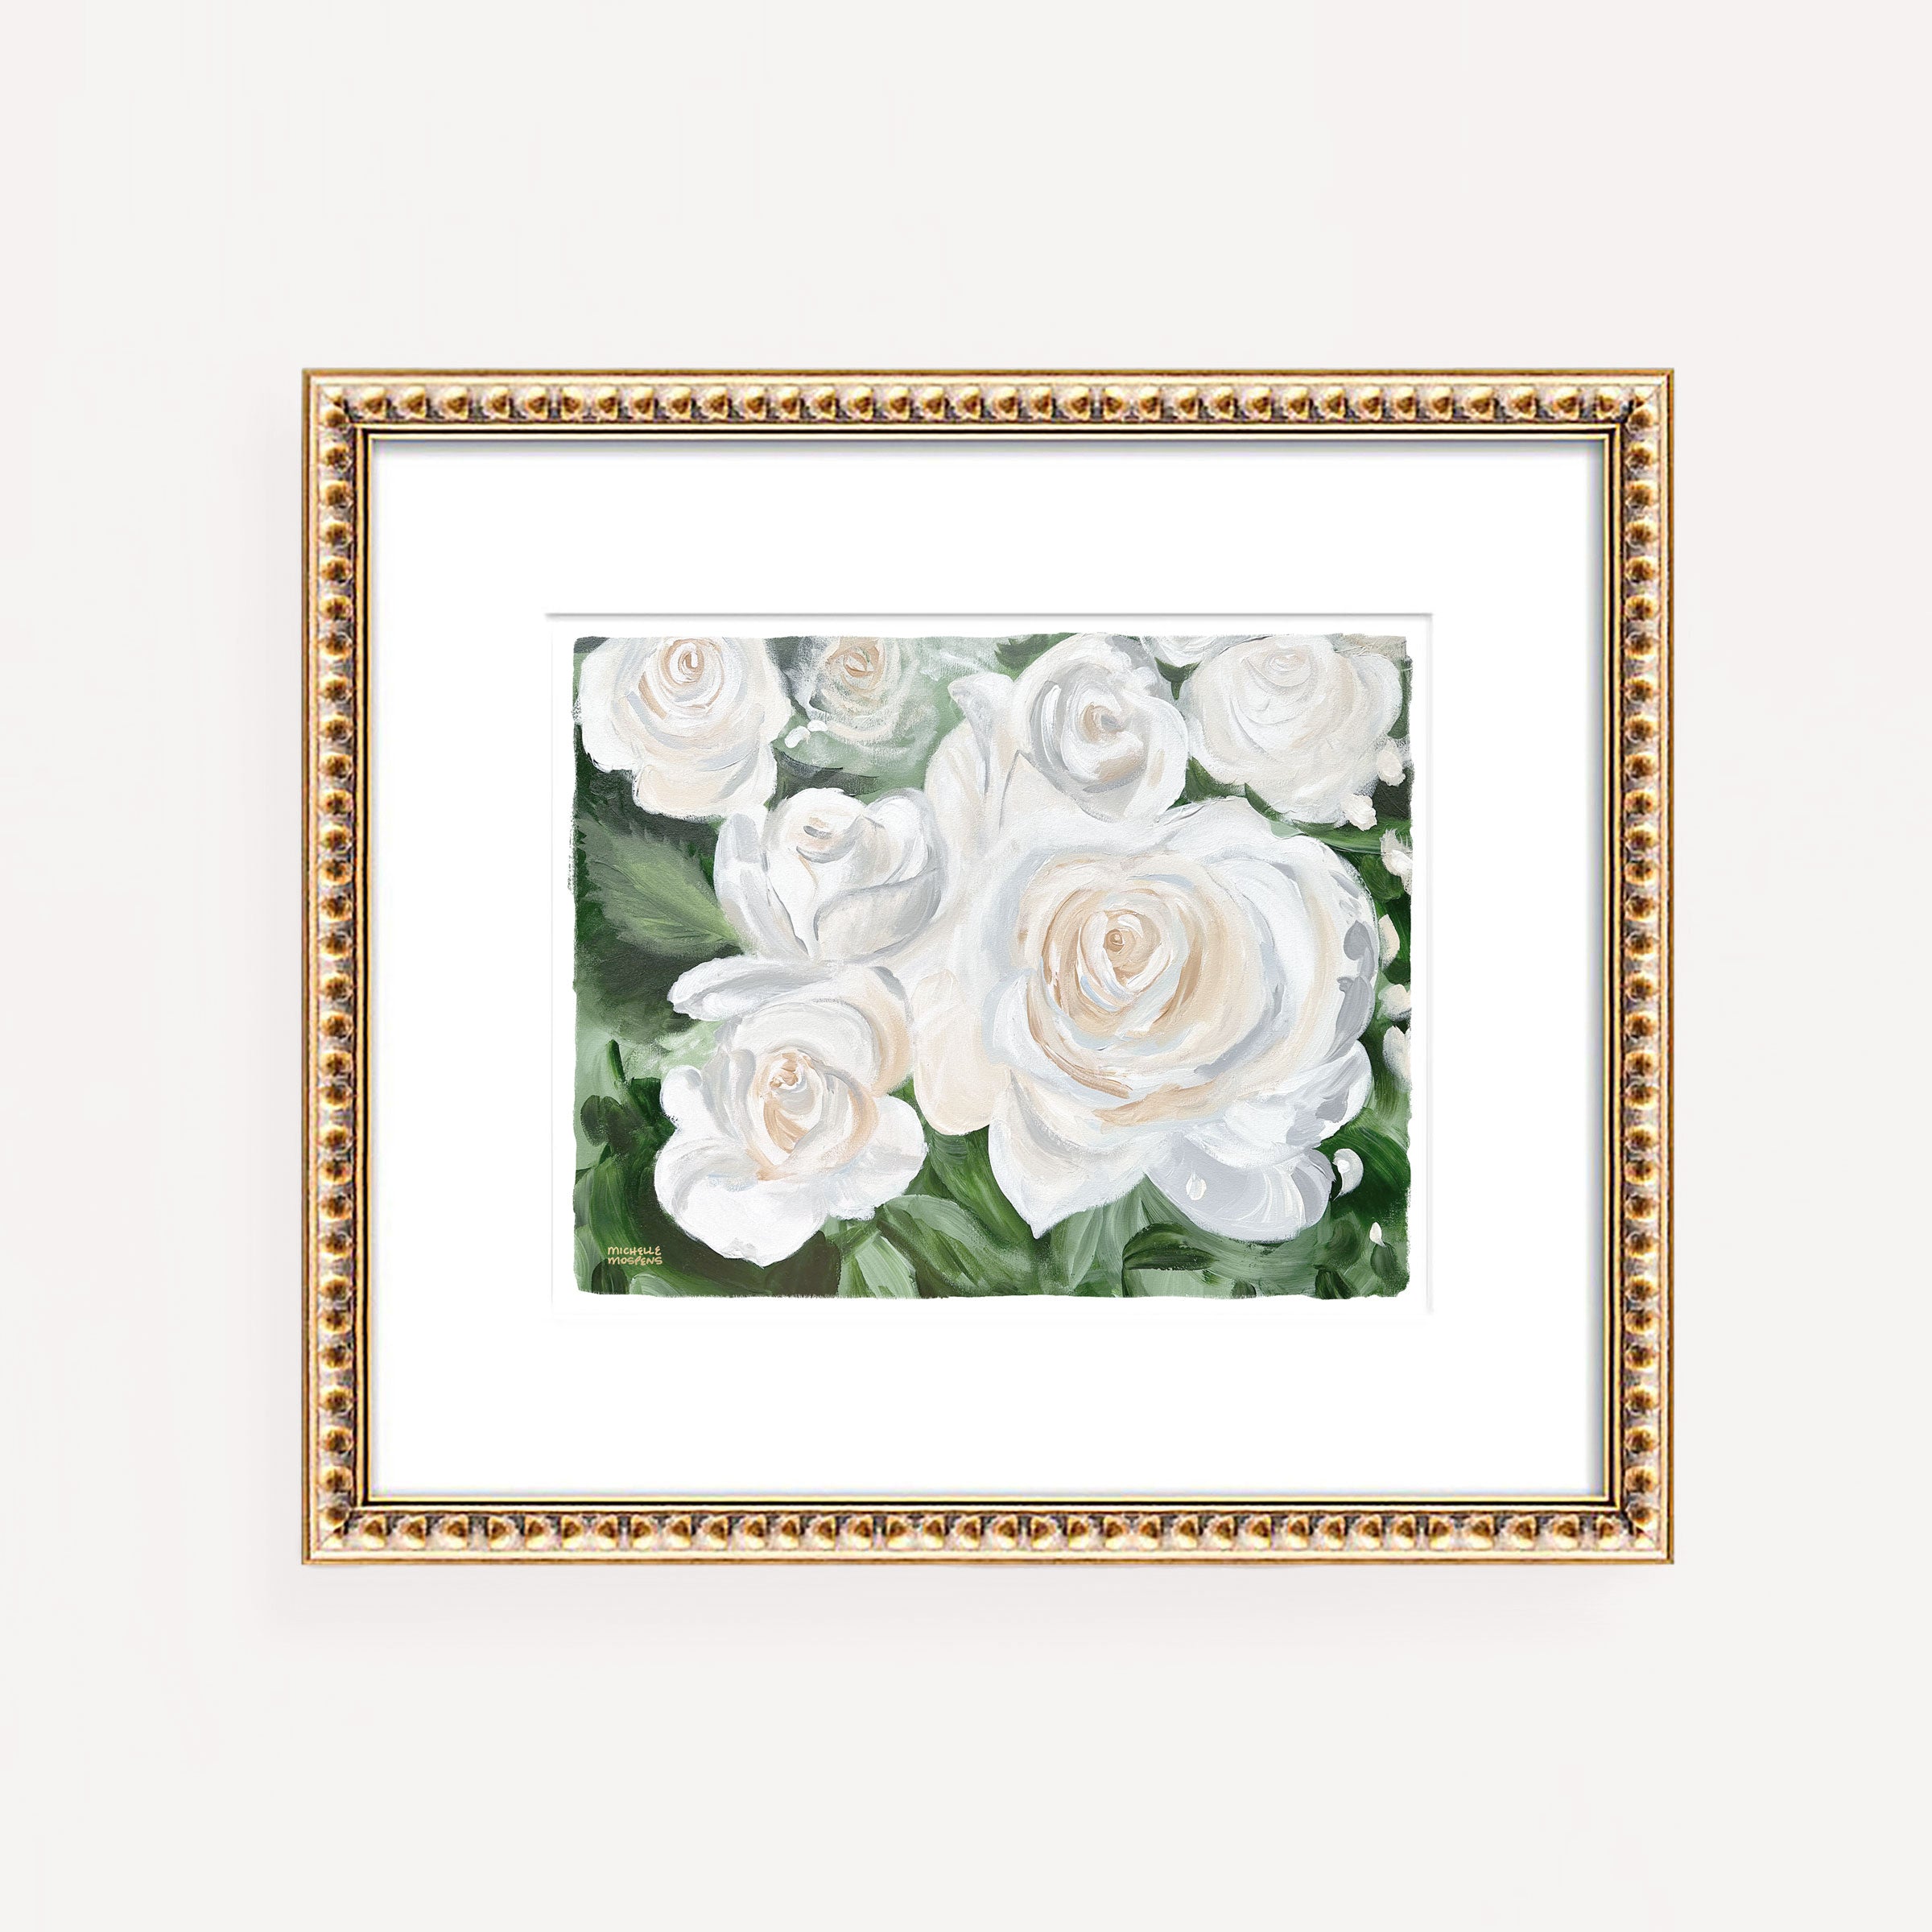 Summer Lover White Roses Painting Wall Art Print by Michelle Mospens